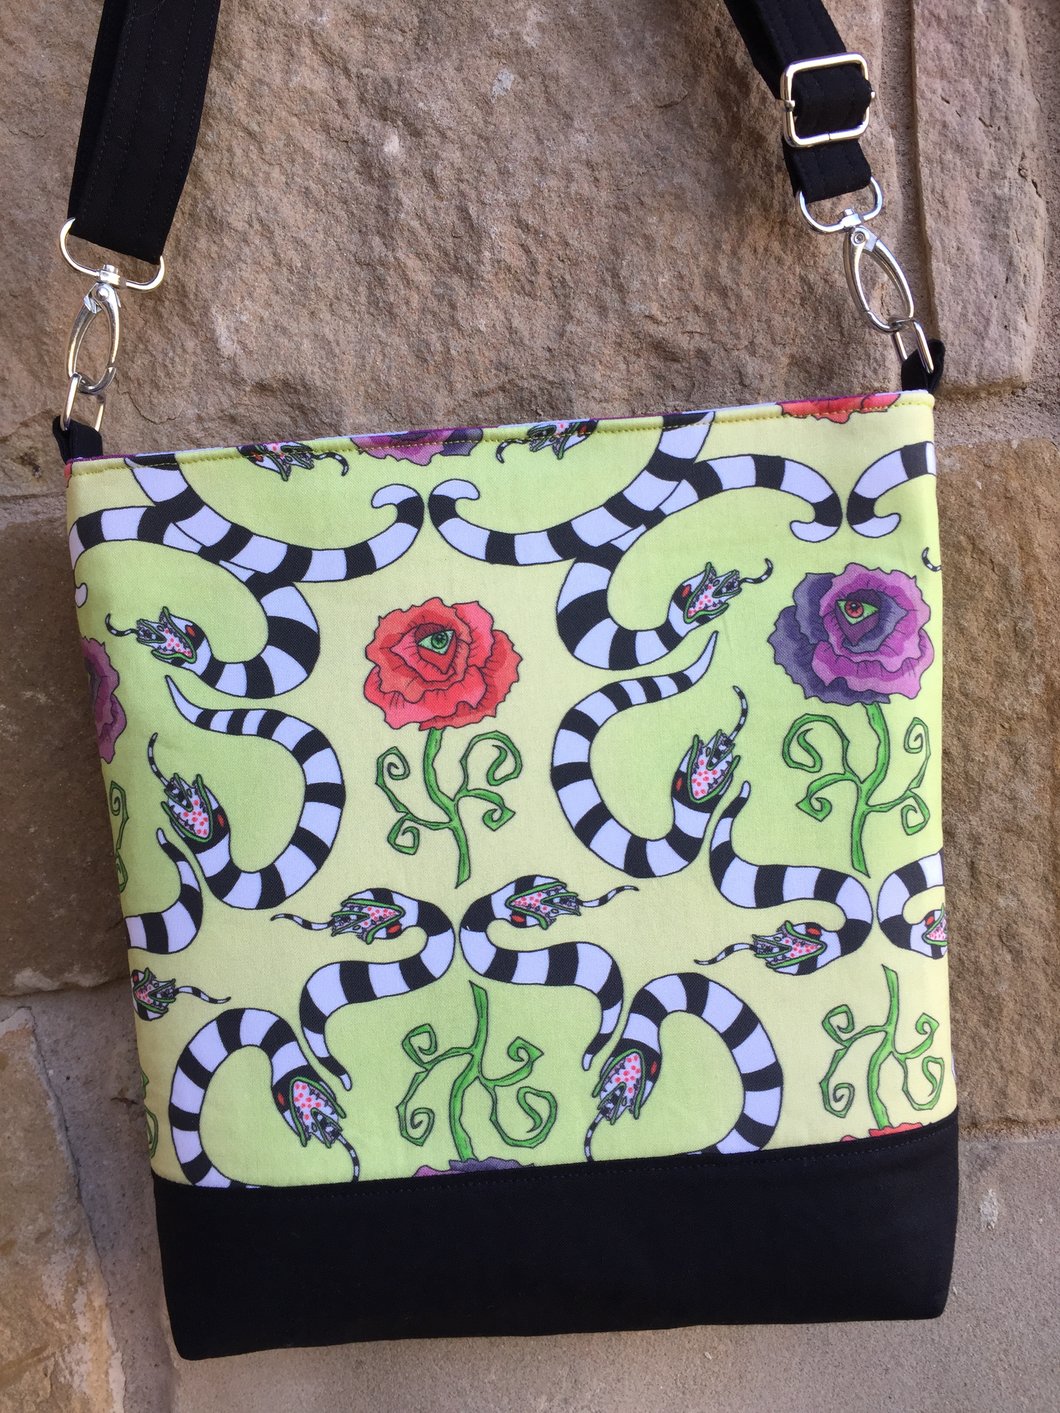 Messenger Bag Made With Saturn Sandworm Inspired Fabric - Adjustable Strap - Zippered Closure - Zippered Pocket - Cross Body Bag